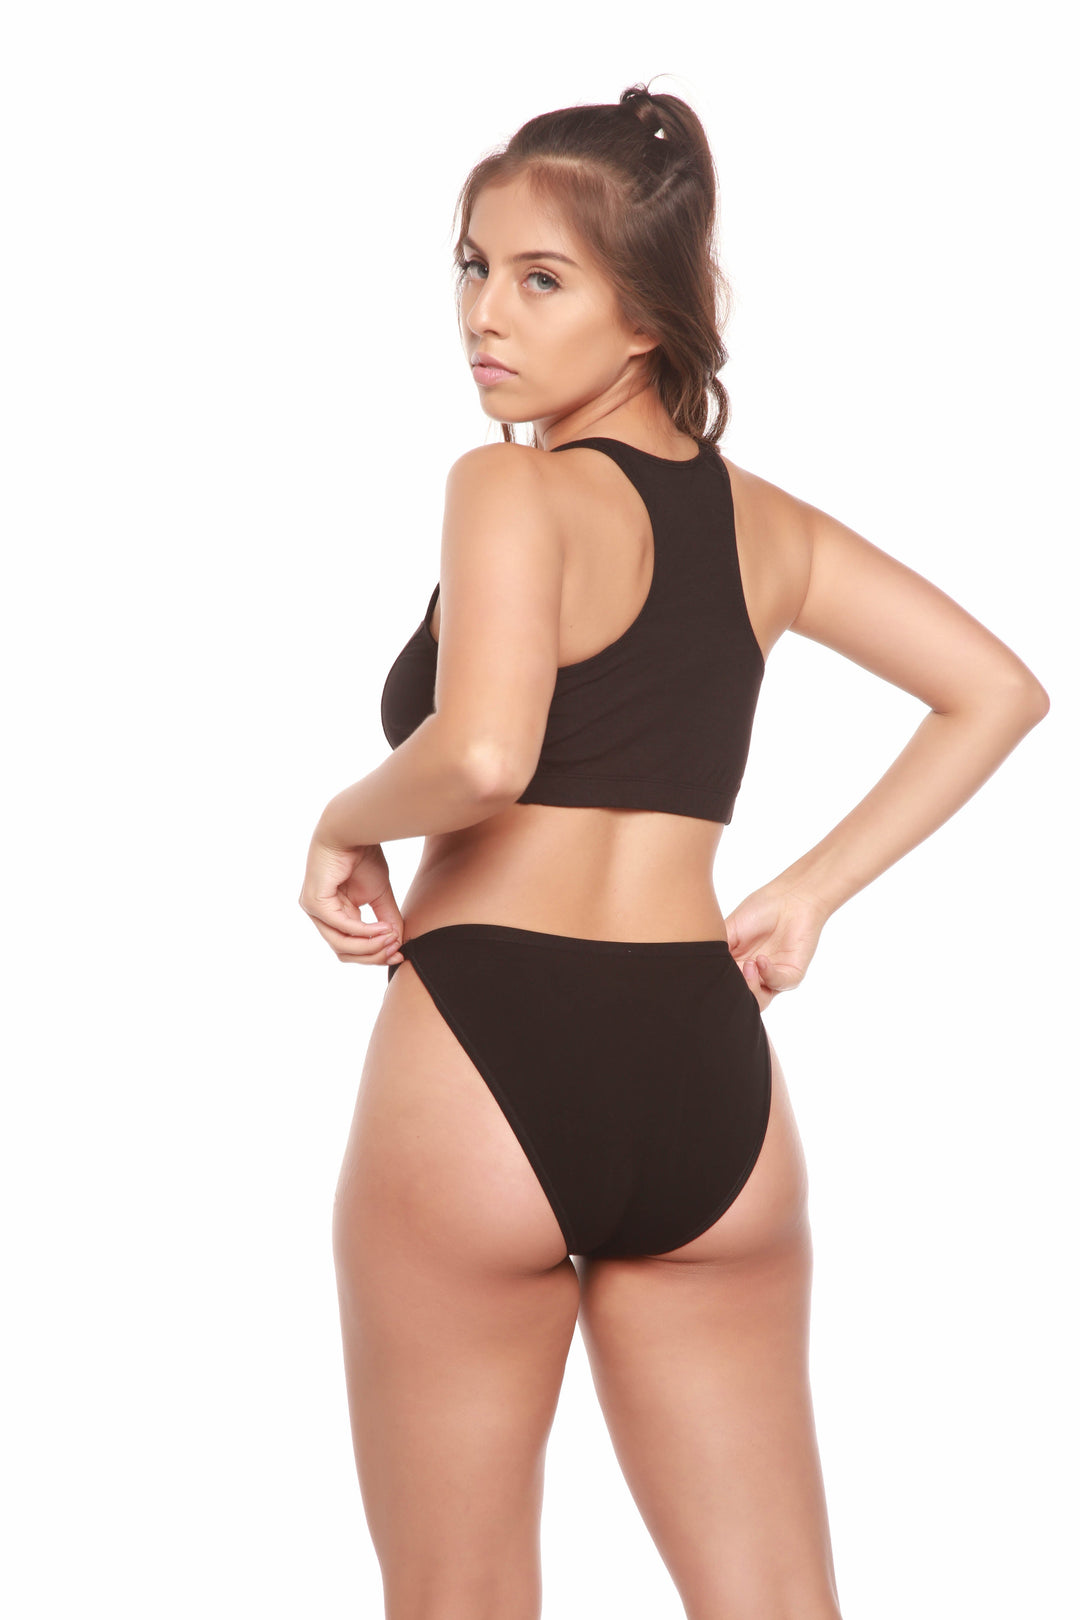 Women's Intimate Underwear Tagged viscose from bamboo - Natural